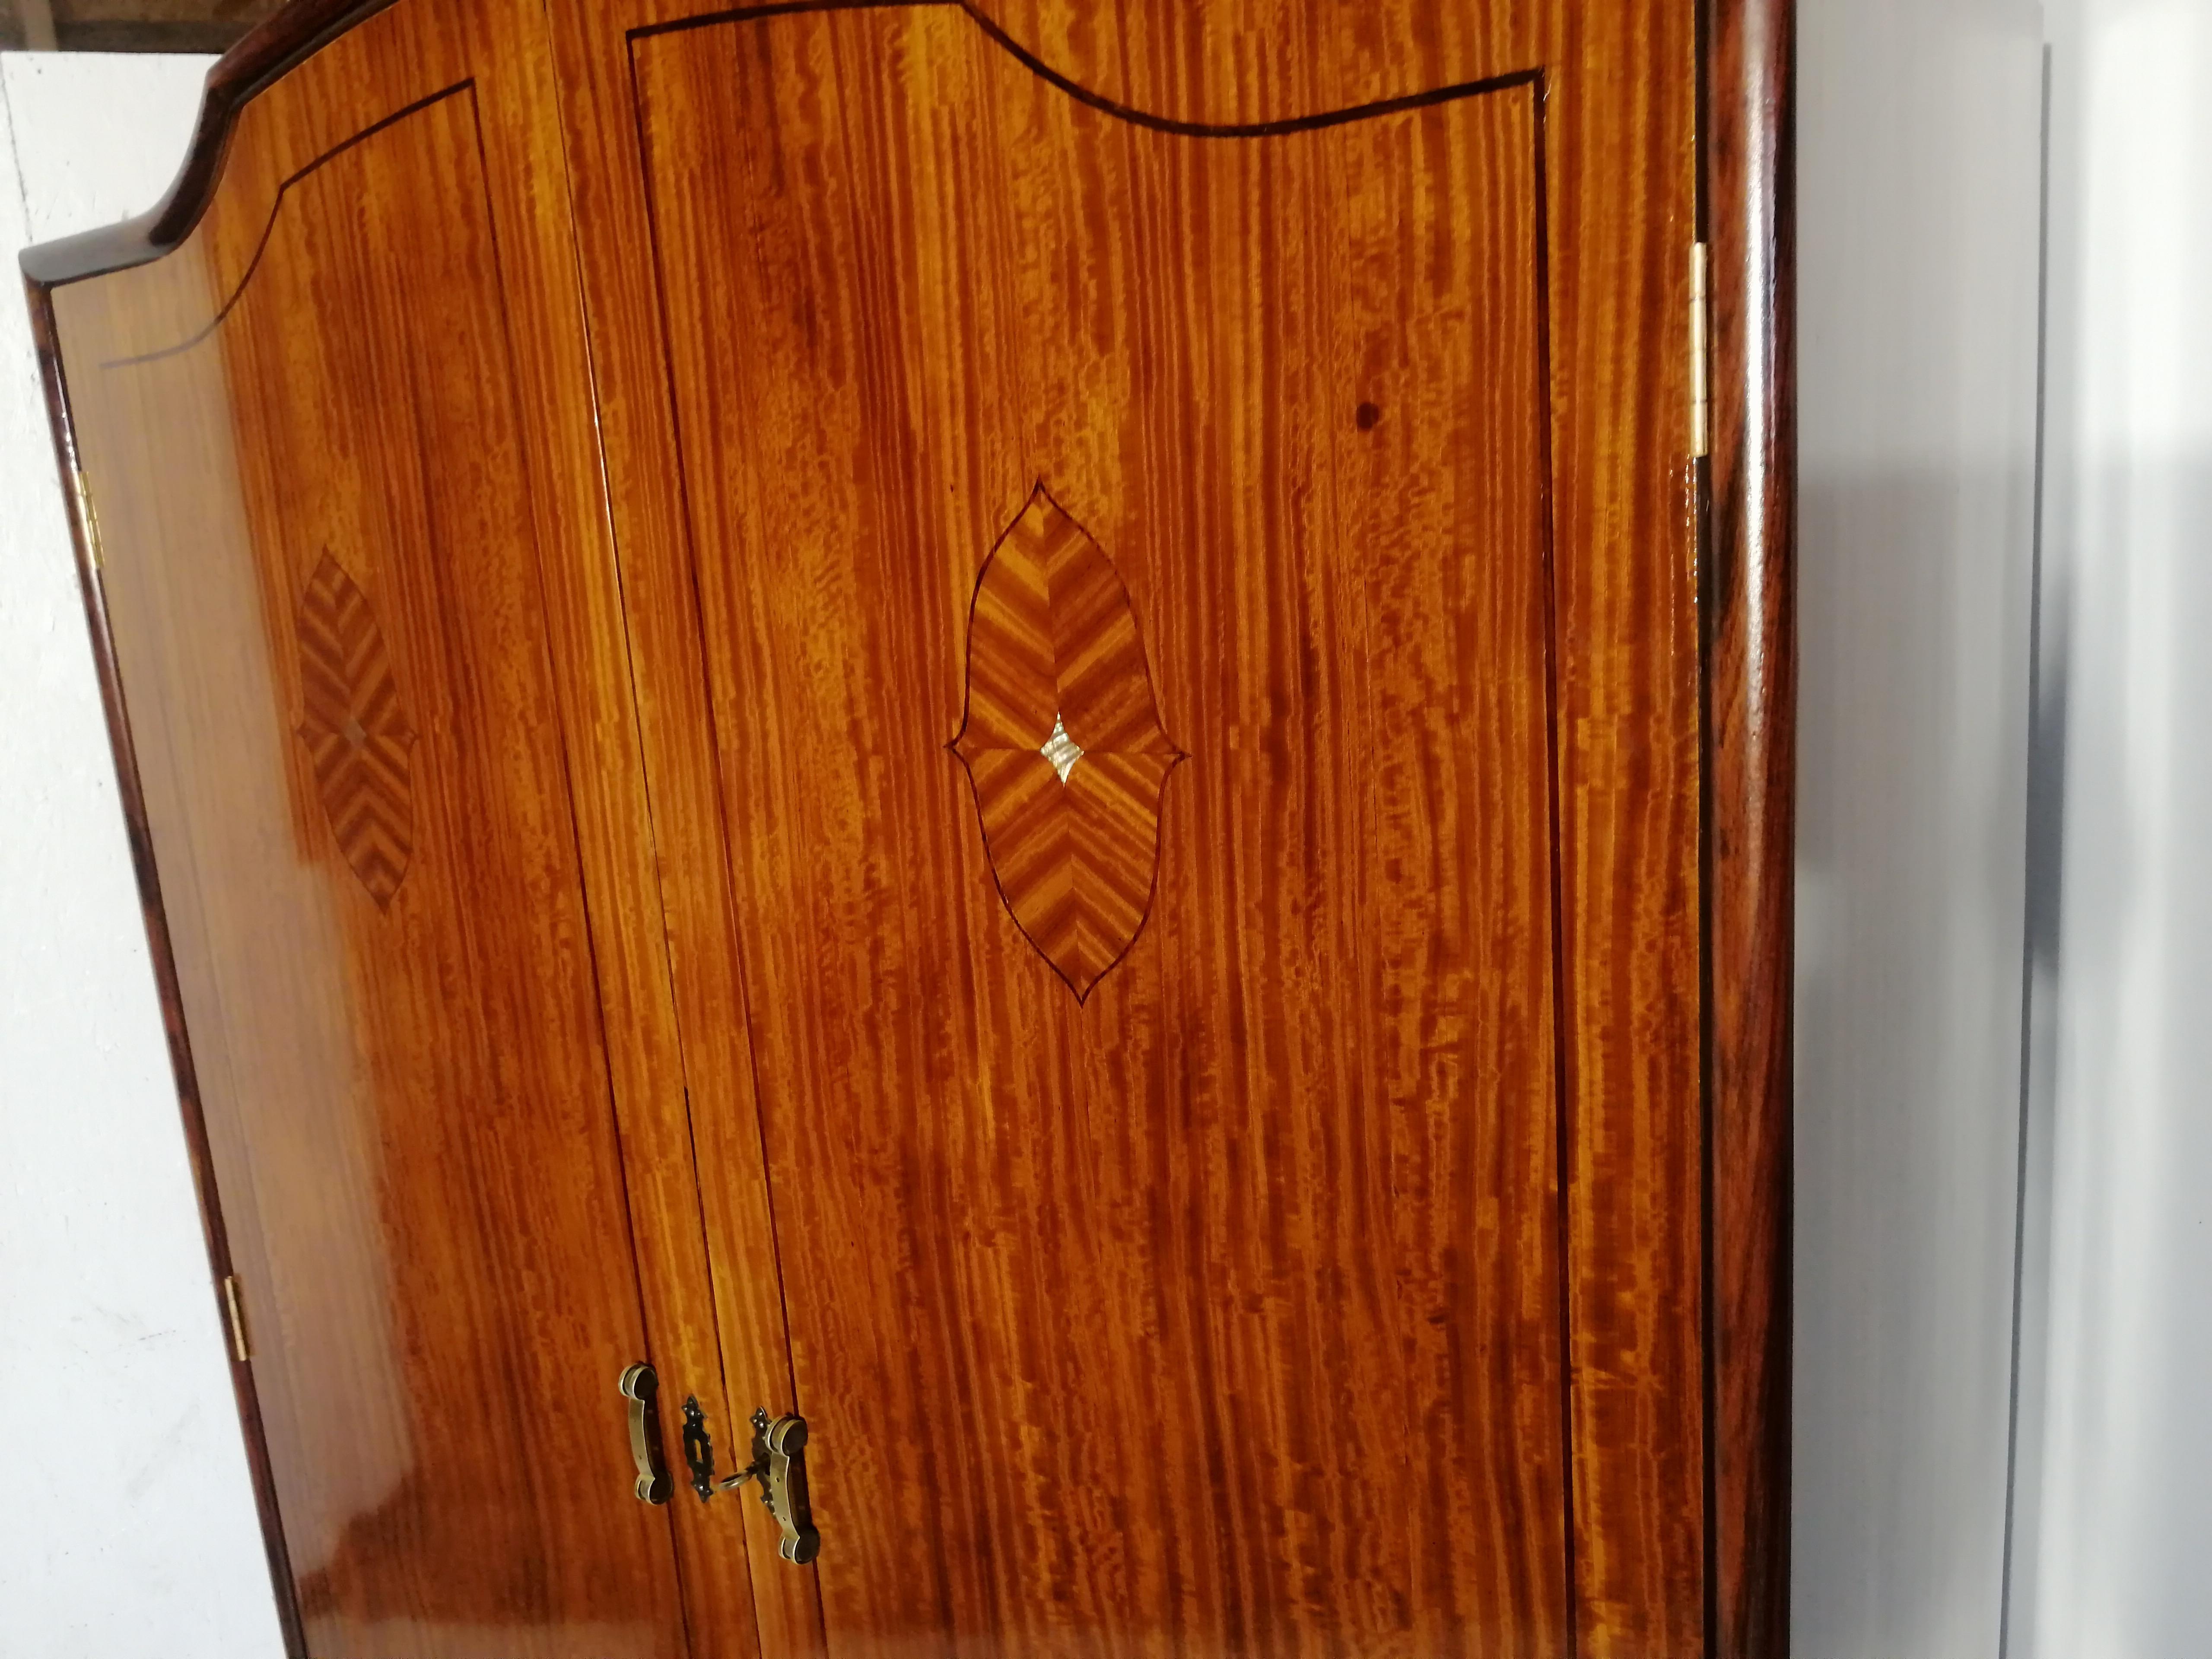 Late 19th Century Art Nouveau Rosewood Wardrobe For Sale